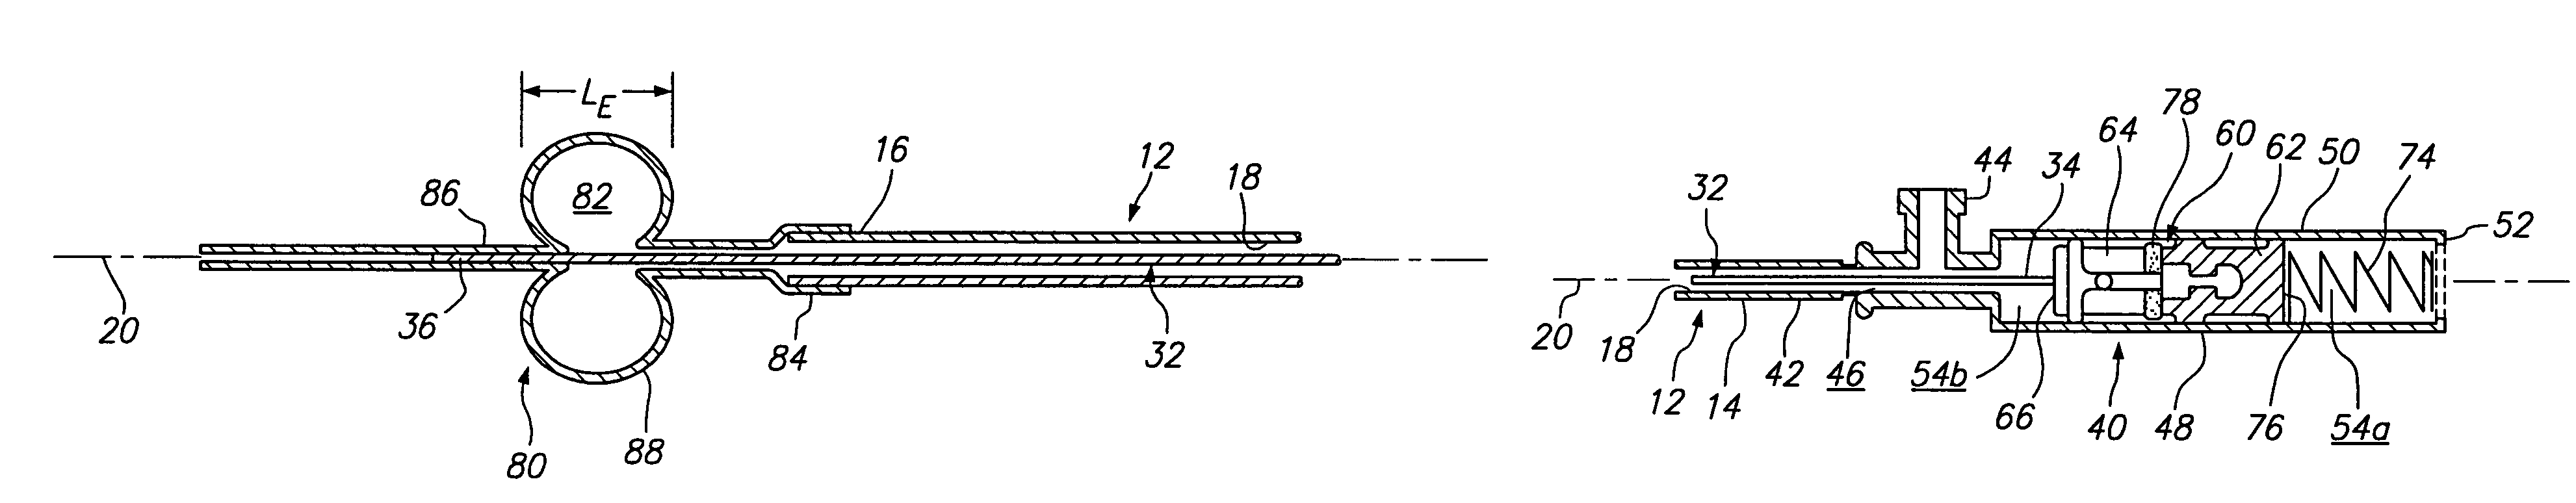 Apparatus and methods for sealing a vascular puncture